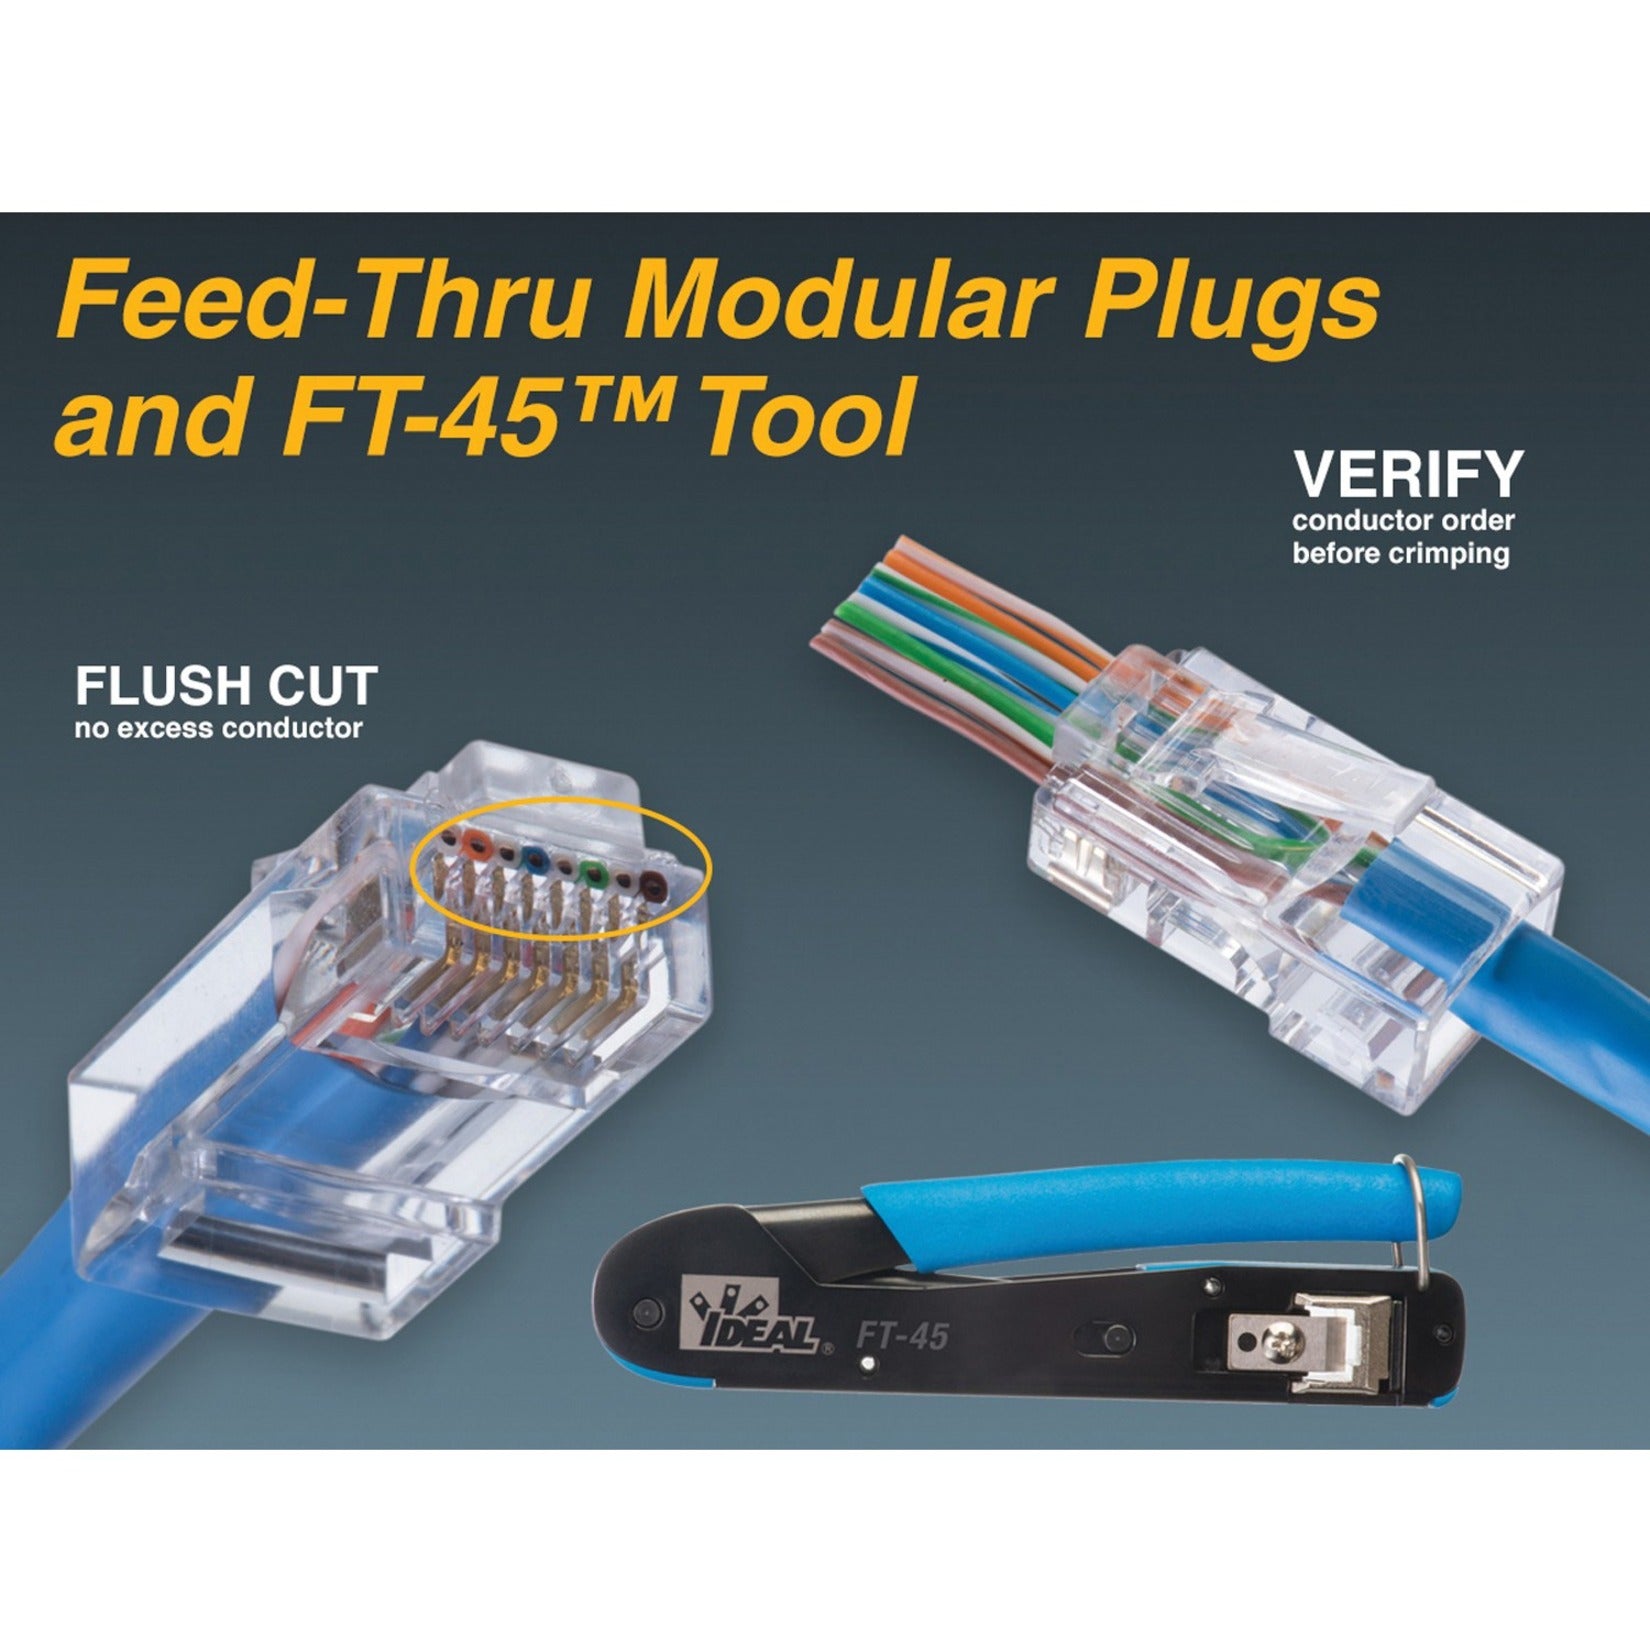 IDEAL 85-371 Feed-Thru CAT5e RJ-45 8P8C Modular Plugs, Network Connector with Strain Relief